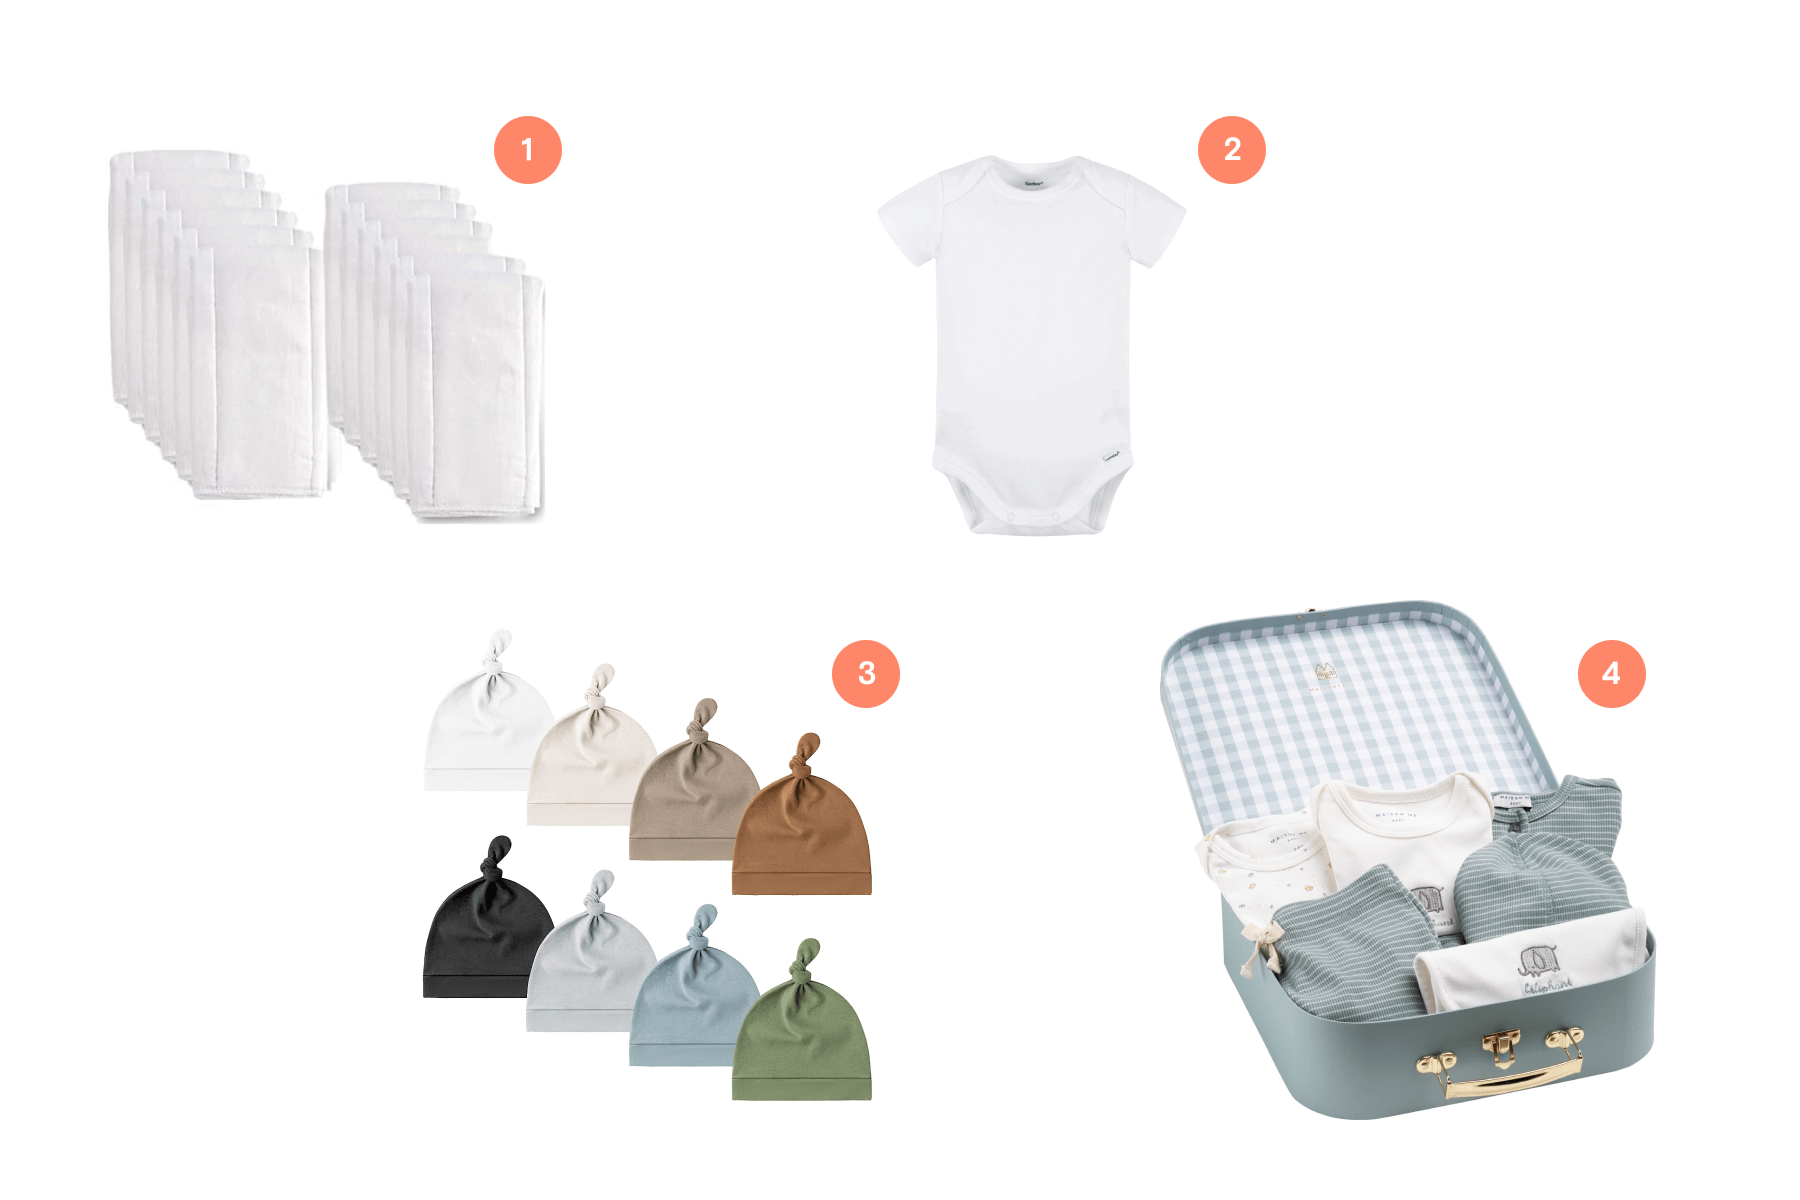 Four numbered baby items: A pack of cloth diapers, a white onesie, eight baby hats in various colors, and a light blue luggage-inspired case folded baby clothes inside.